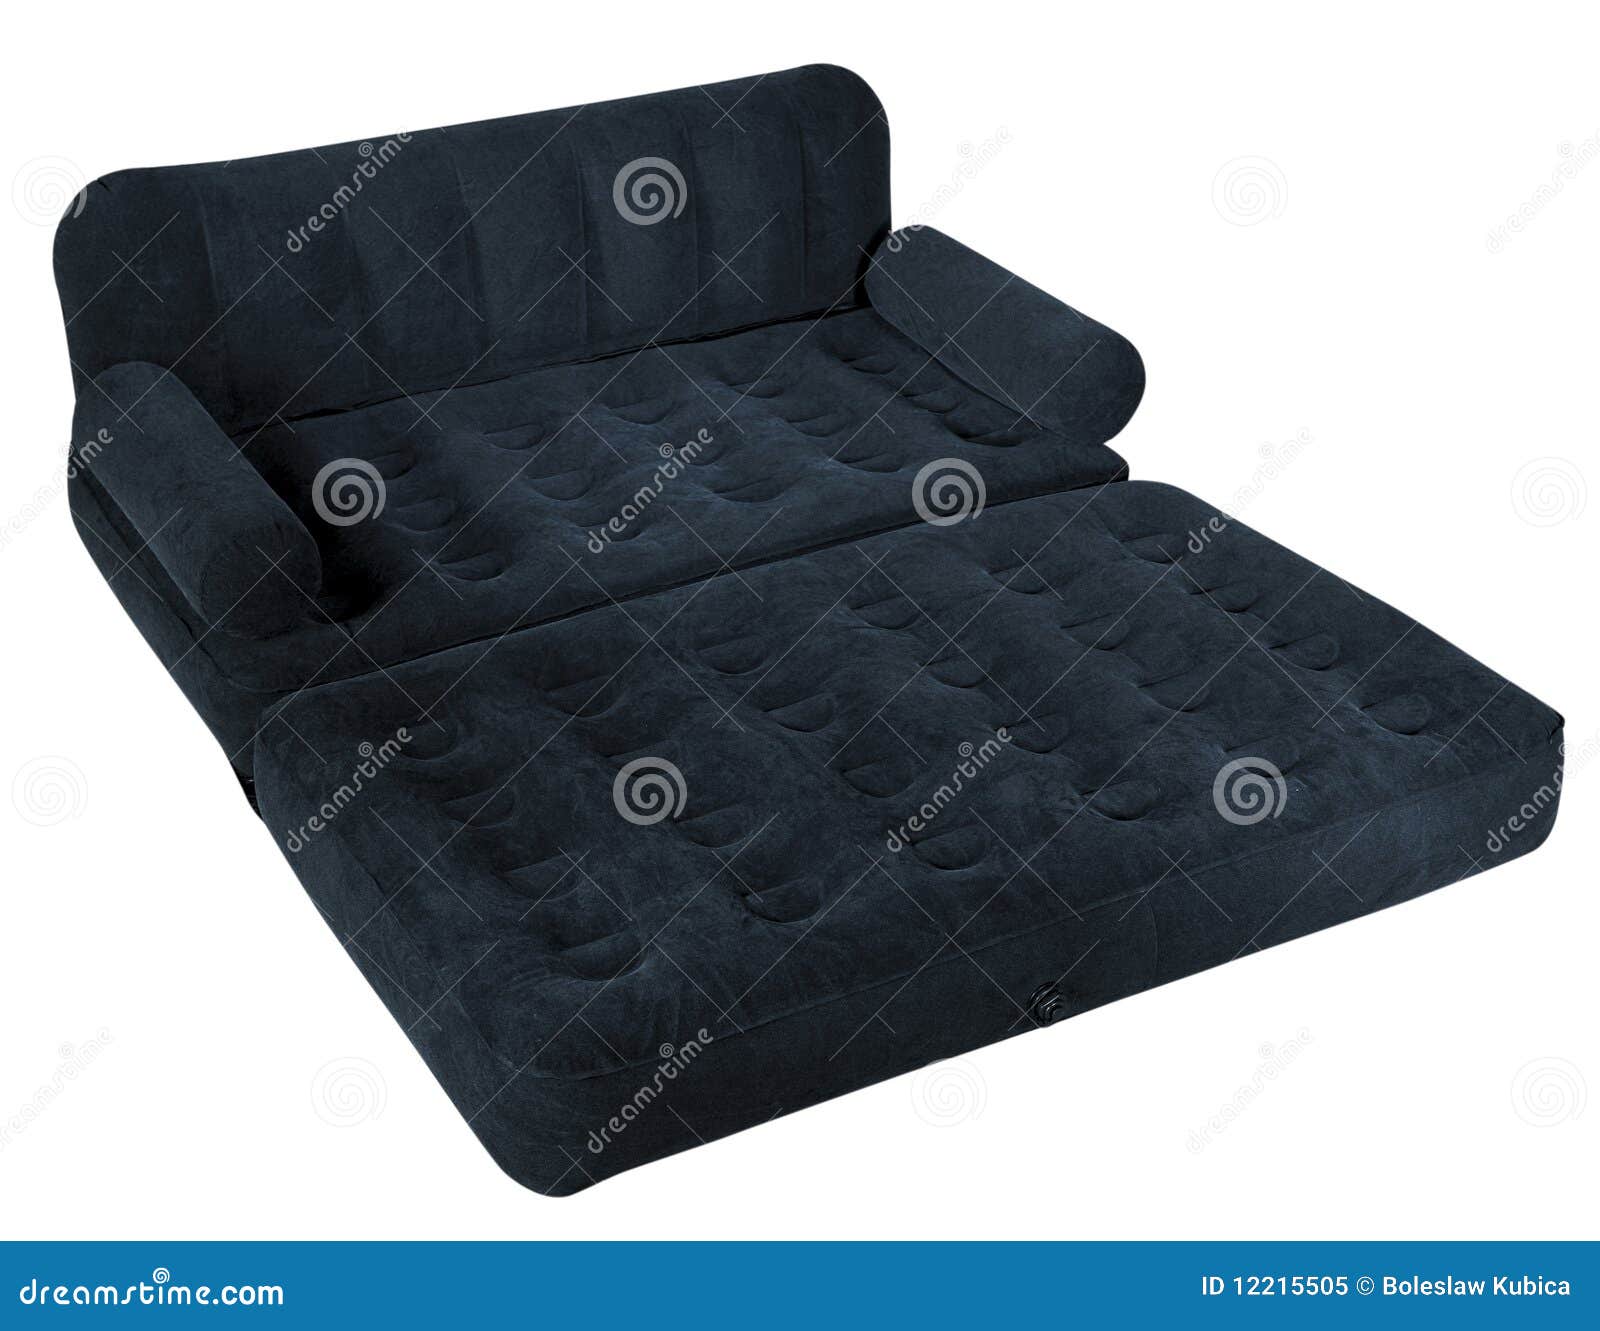 air mattress for living room couch